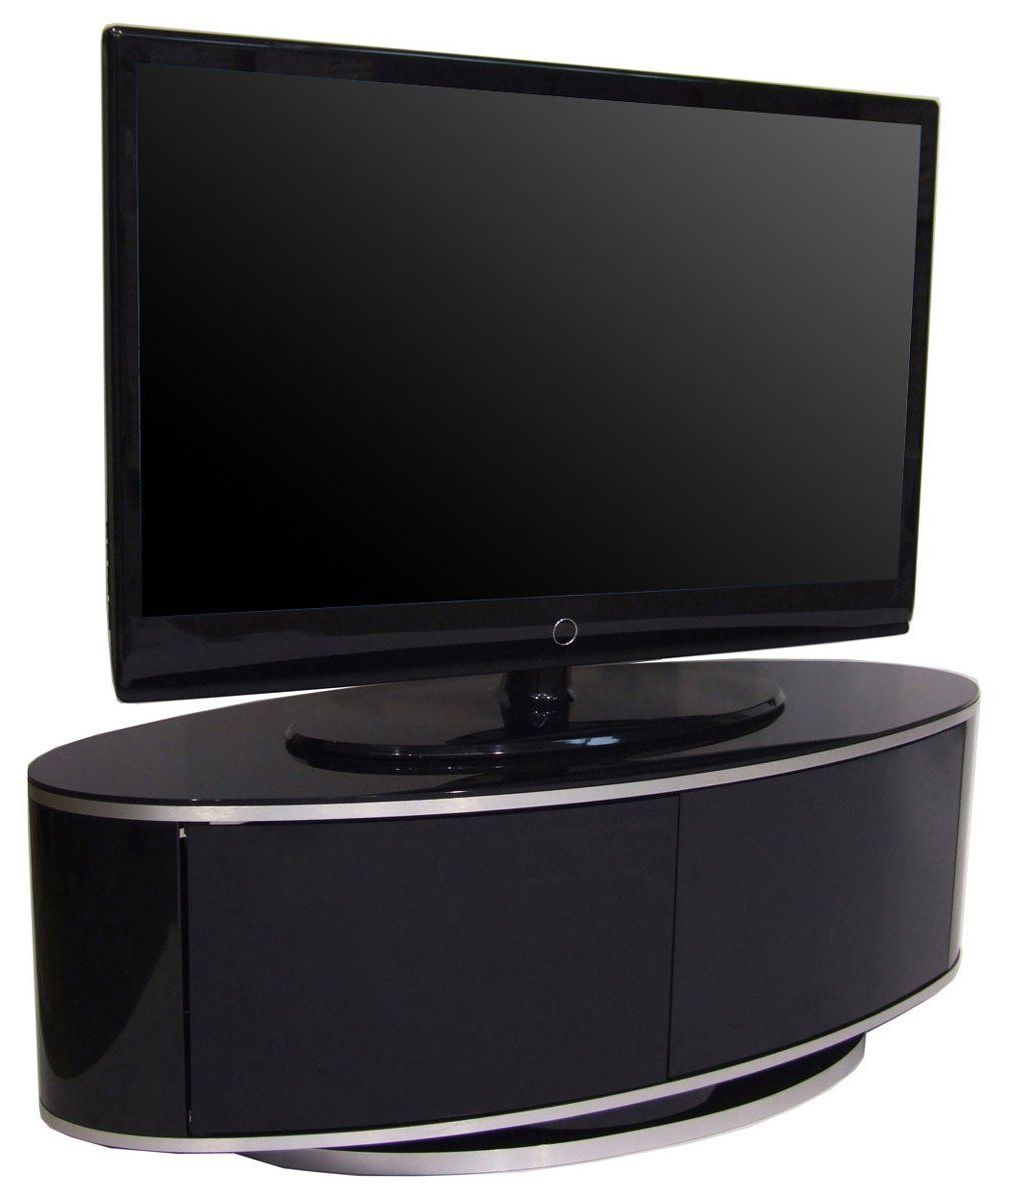 Oval Glass Tv Stands For Most Recent Mda Designs High Gloss Black Oval Tv Stand With Swivel Base And (View 12 of 20)